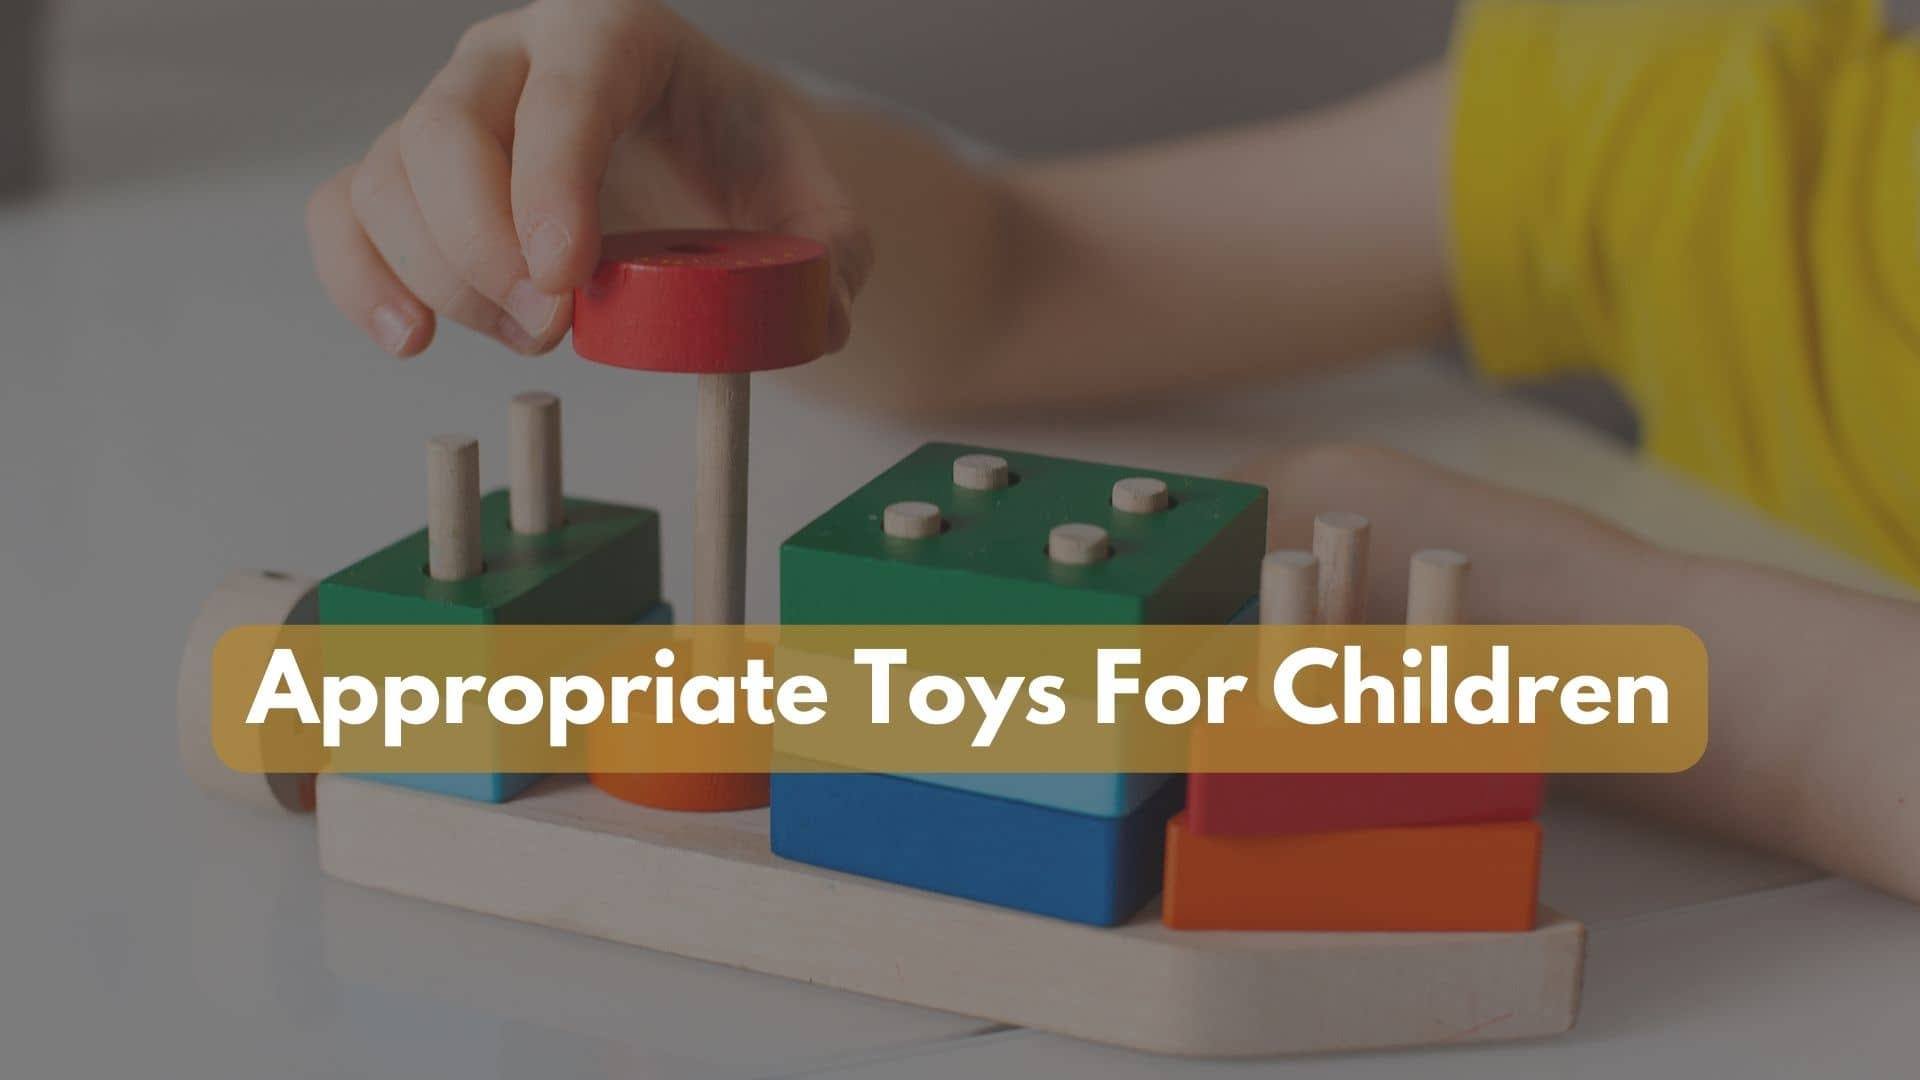 What Are Some Appropriate Toys For Children?